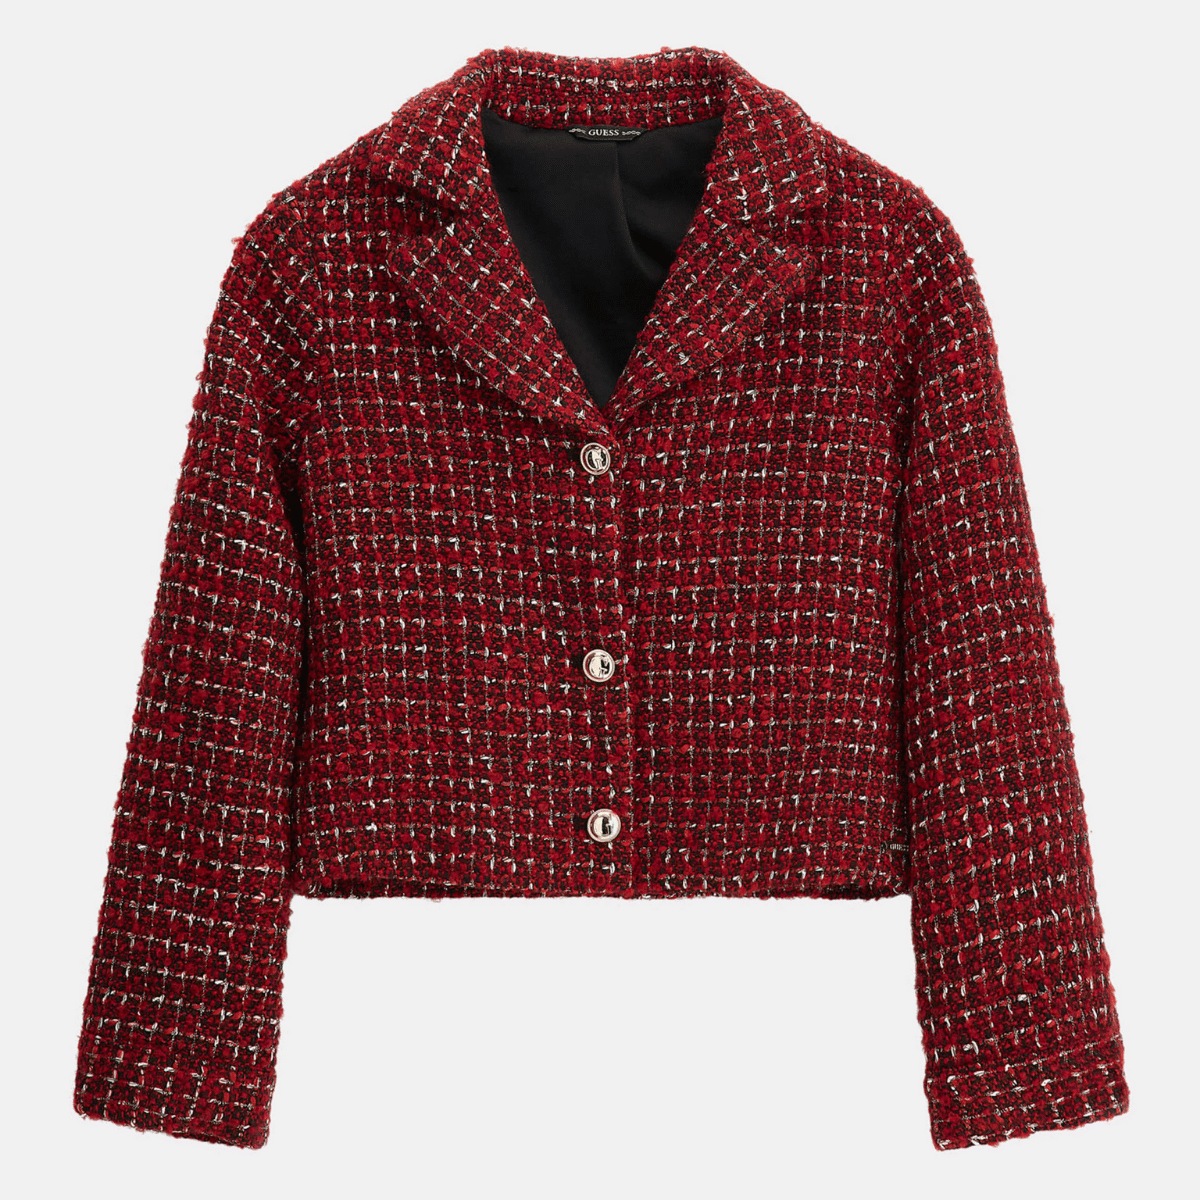 Guess girls red winter short coat on grey background